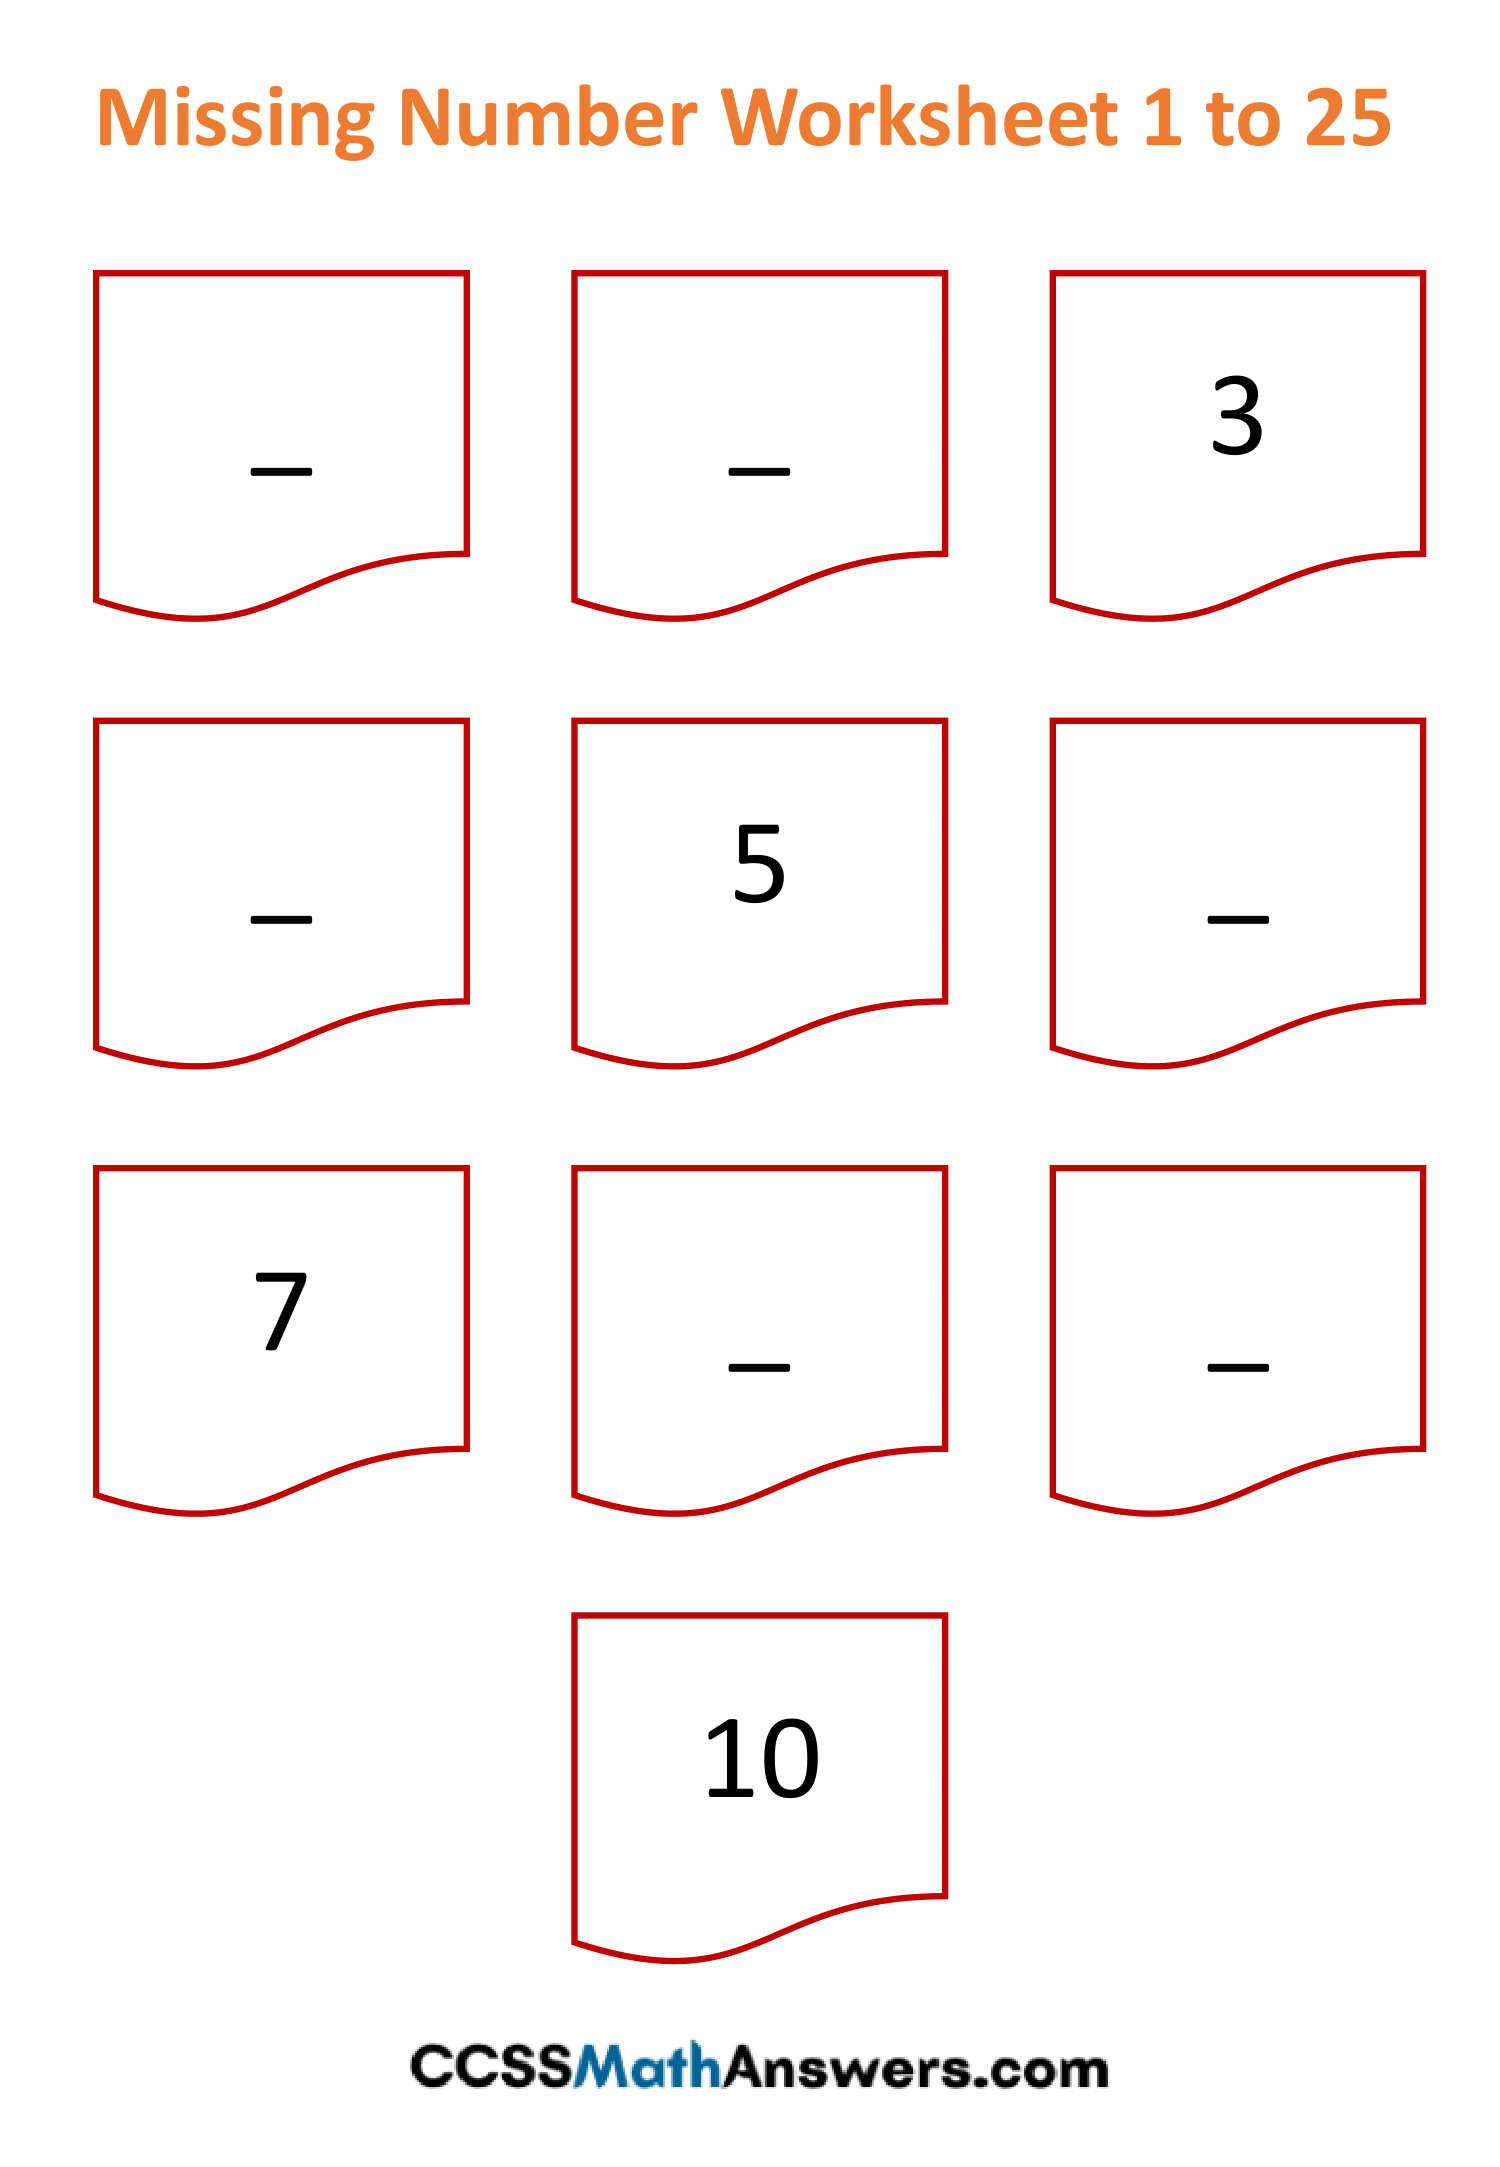 Fill in Missing Numbers Worksheet 1 to 25